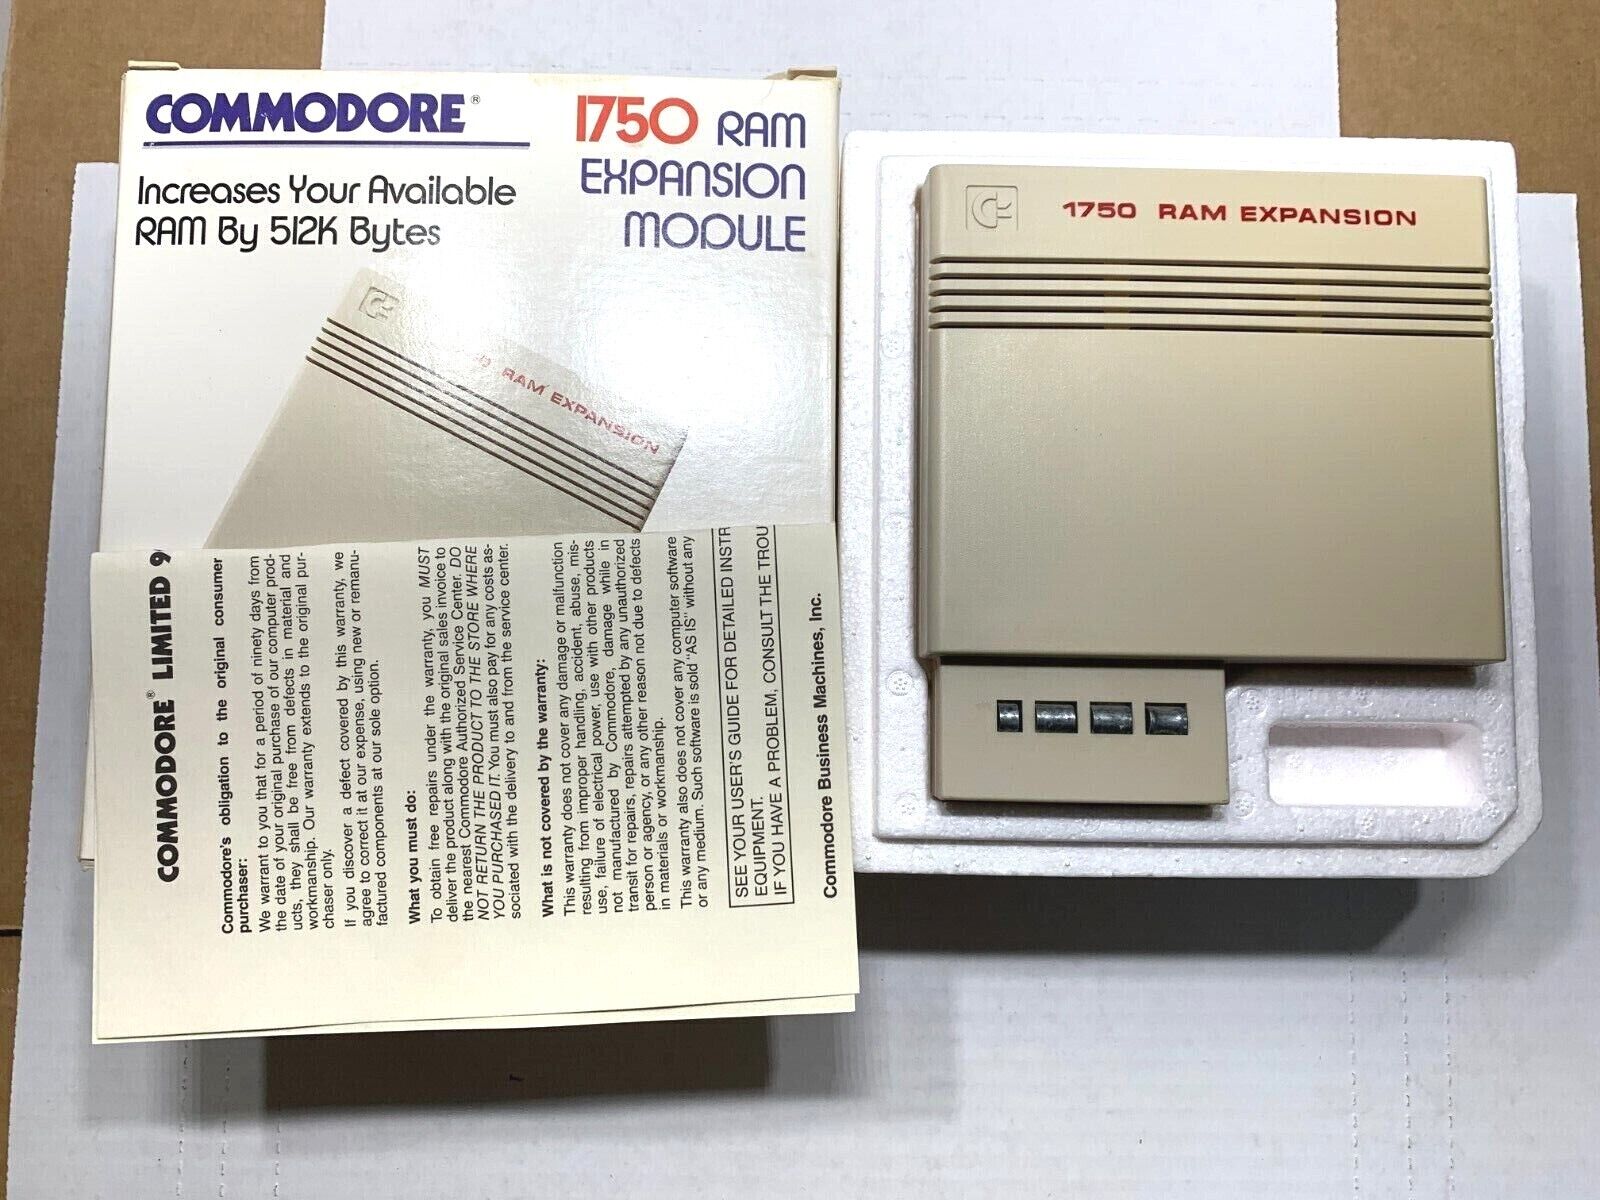 Commodore 1750 Ram Expansion Module Personal Computer RAM